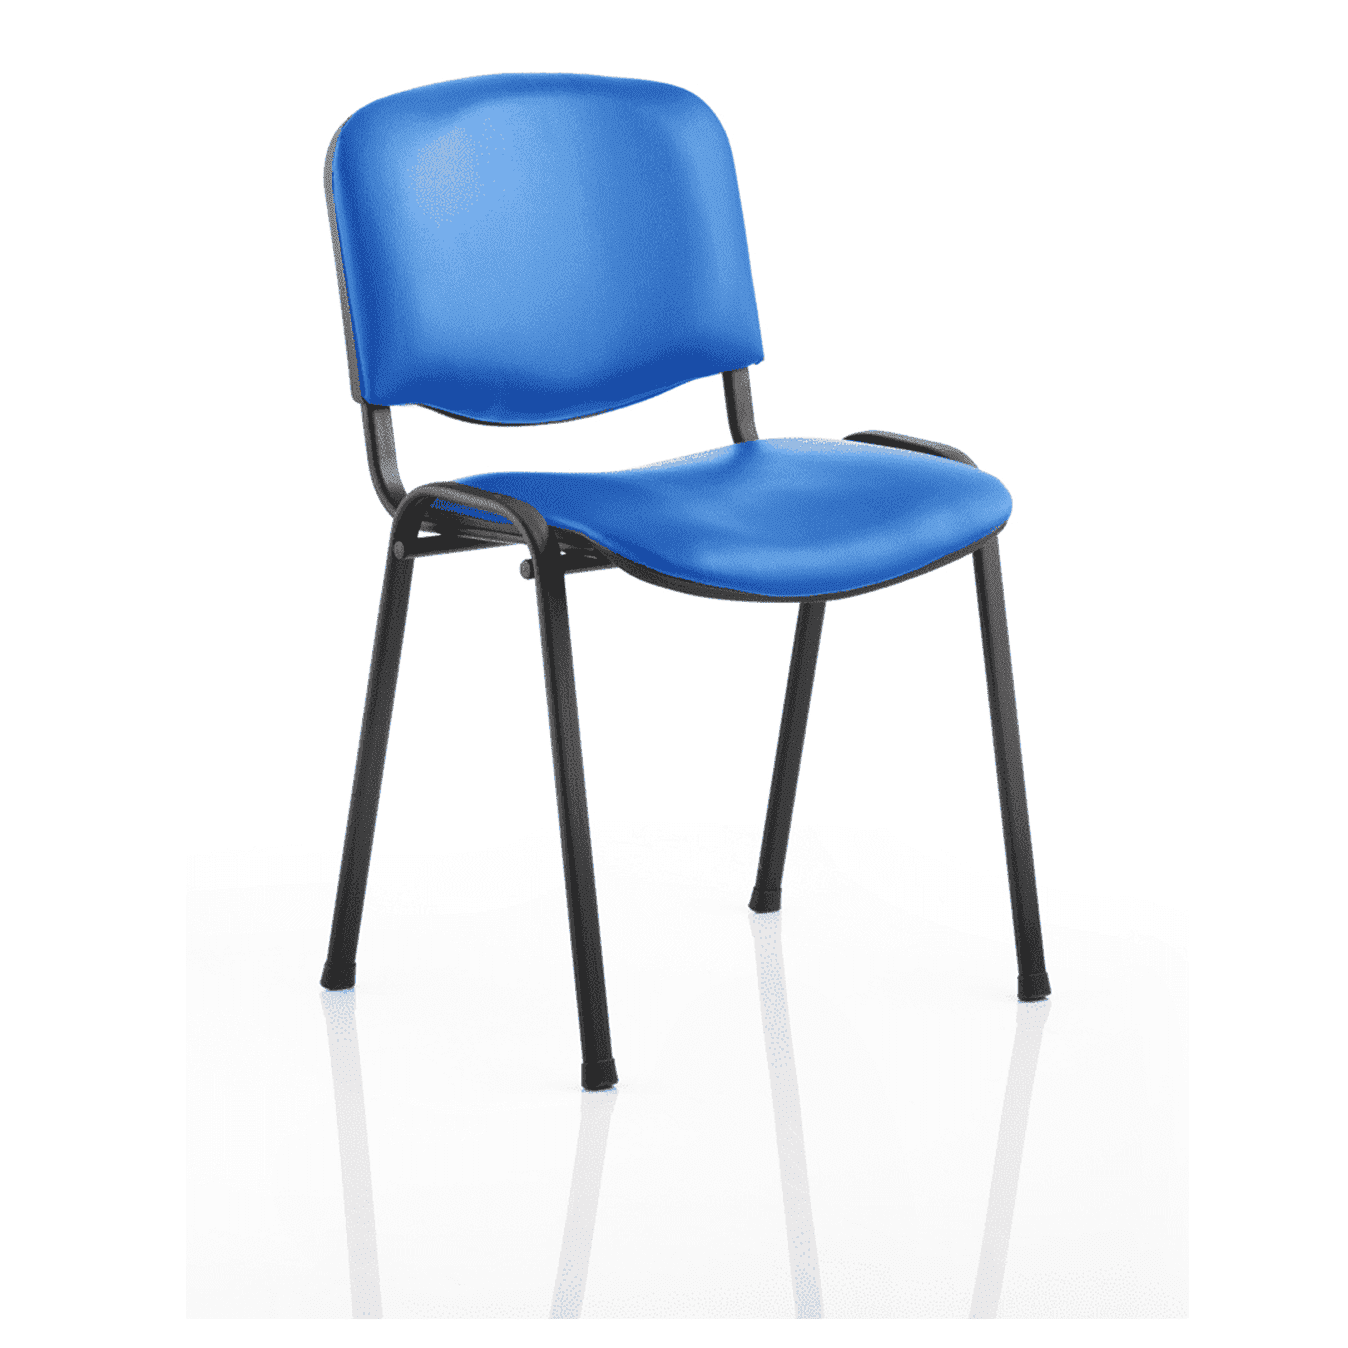 ISO Stackable Visitor/Conference Chair - Pre-Assembled, 110kg Capacity, 6hr Usage, Metal Frame, Fabric/Mesh/Vinyl/Wood Options - 535x410x820mm